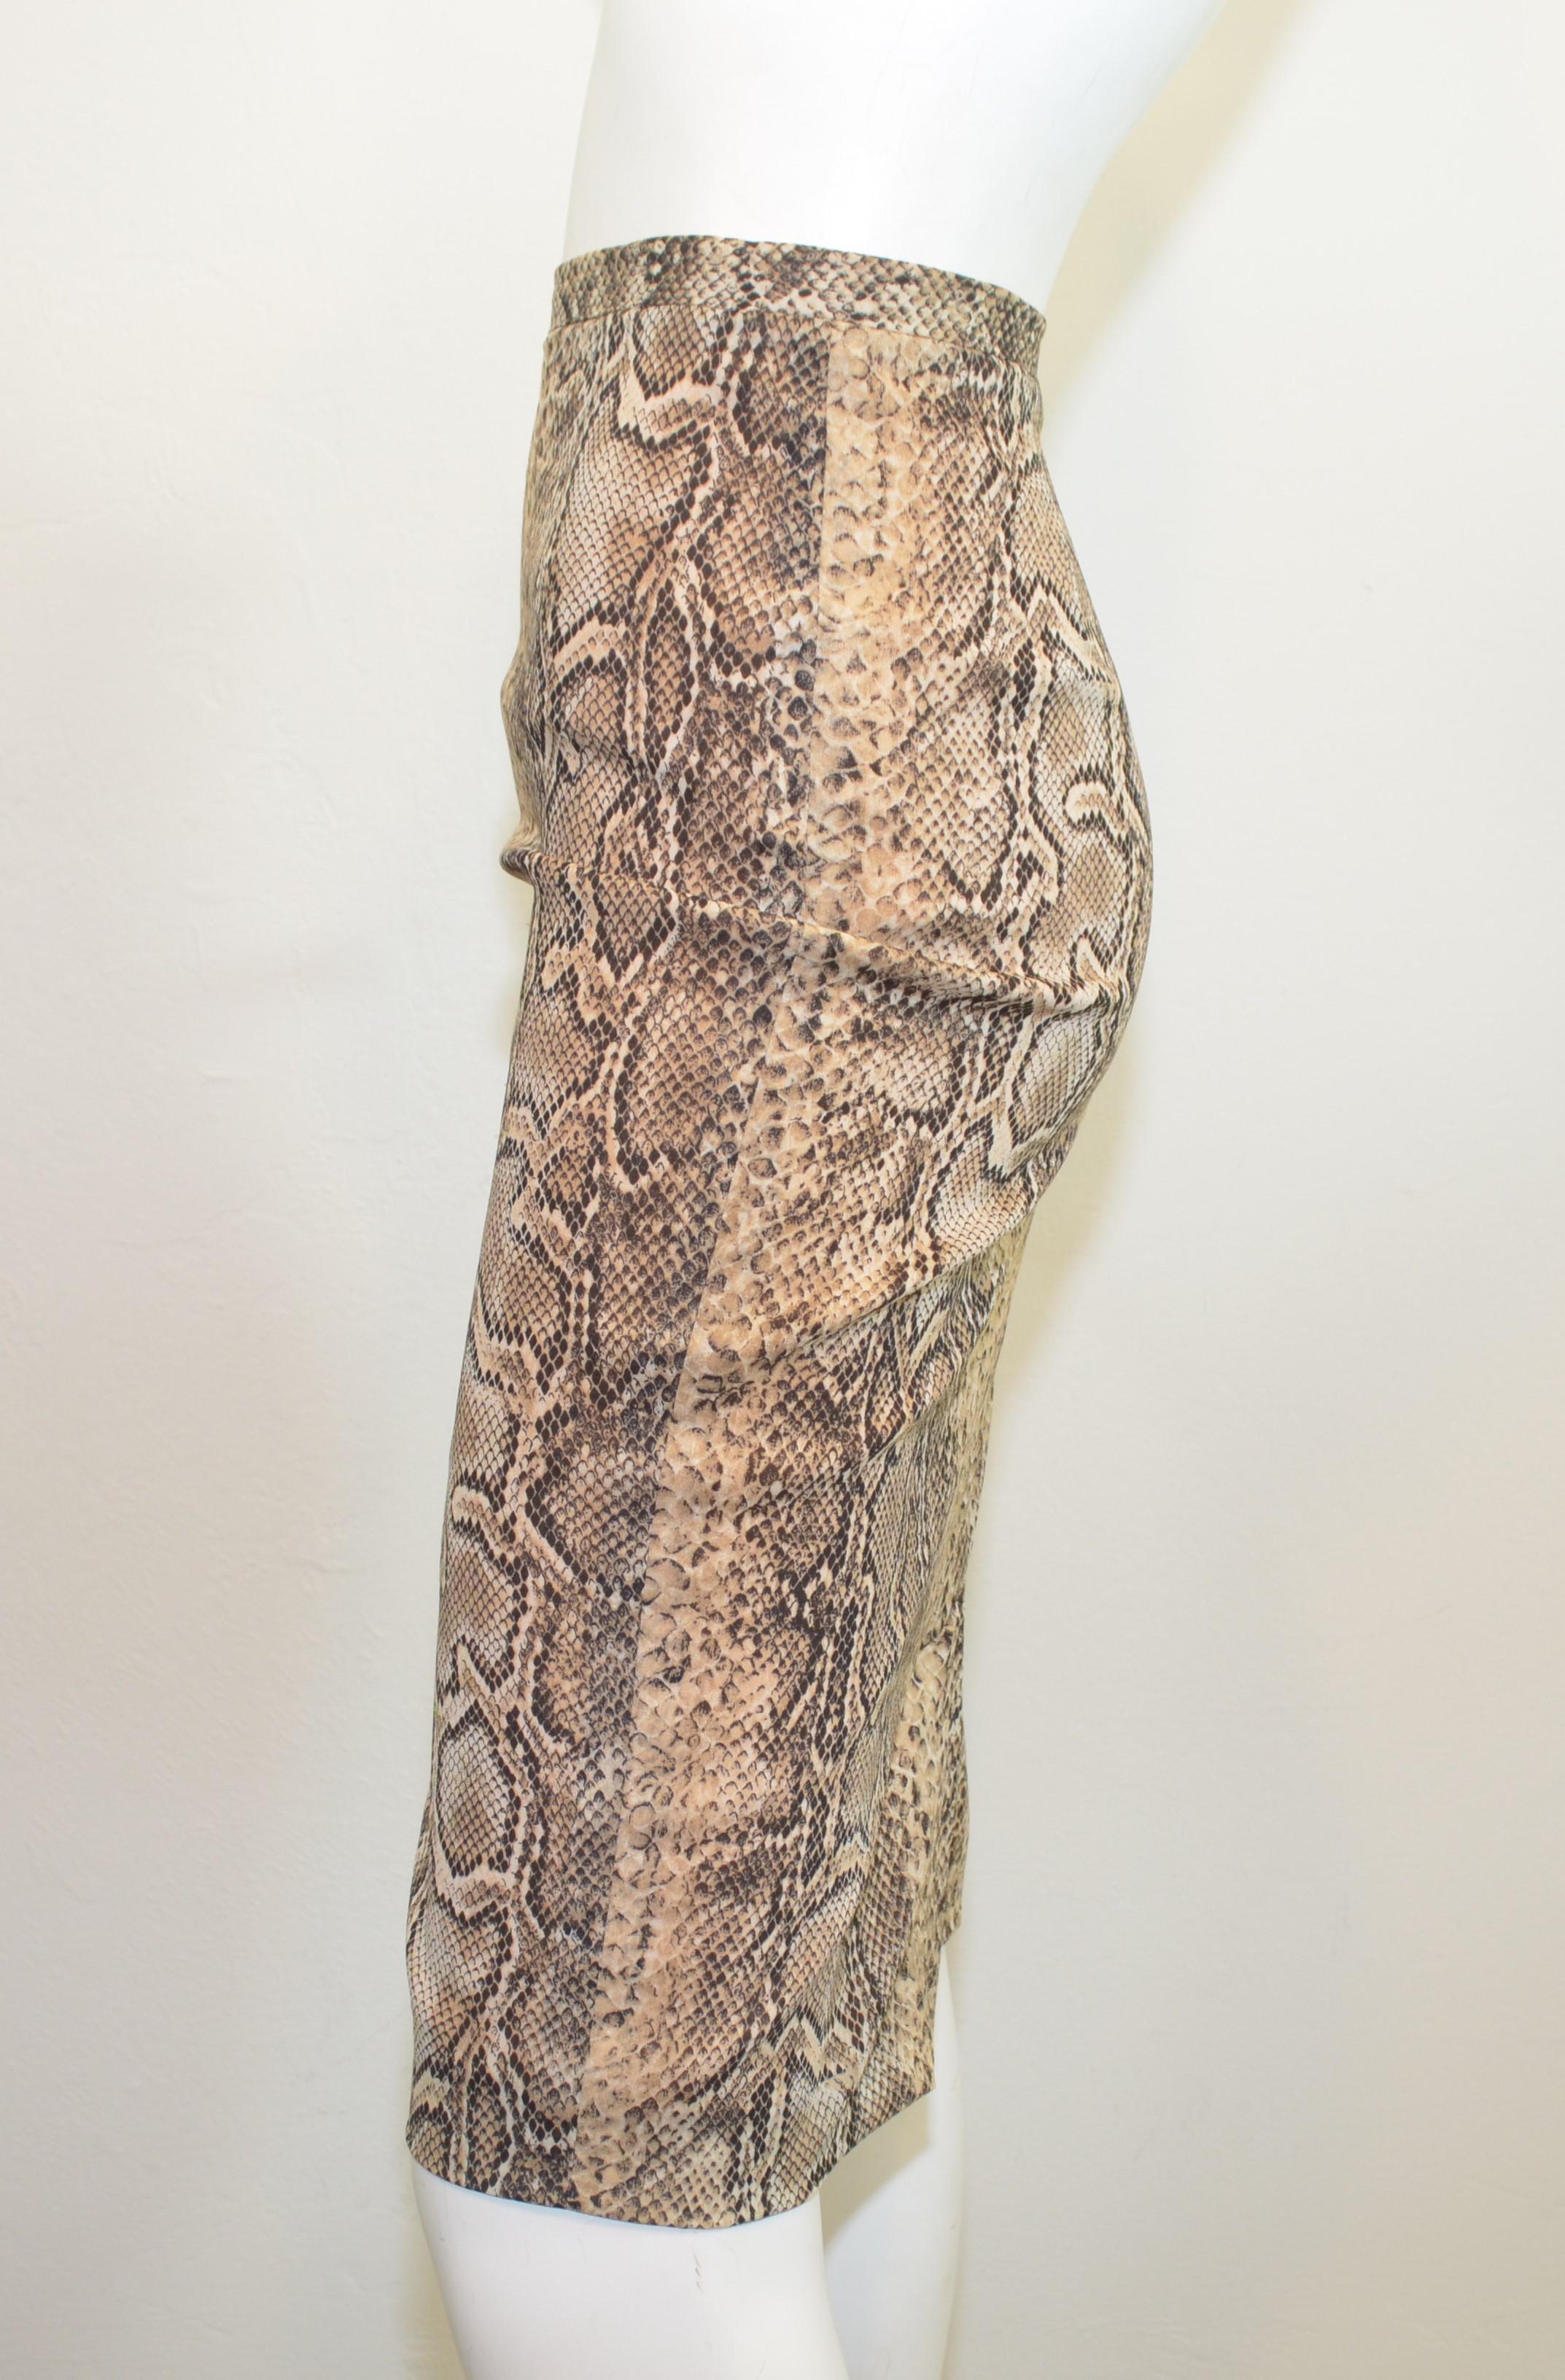 Dolce & Gabbana Snakeskin Pencil Skirt -- featured in a neutral beige and black, back zipper fastening, full lining, and composed with a silk, nylon, and lycra blend. Skirt is a size 46, made in Italy.

measurements:
waist 32''
hips 38''
length 24''